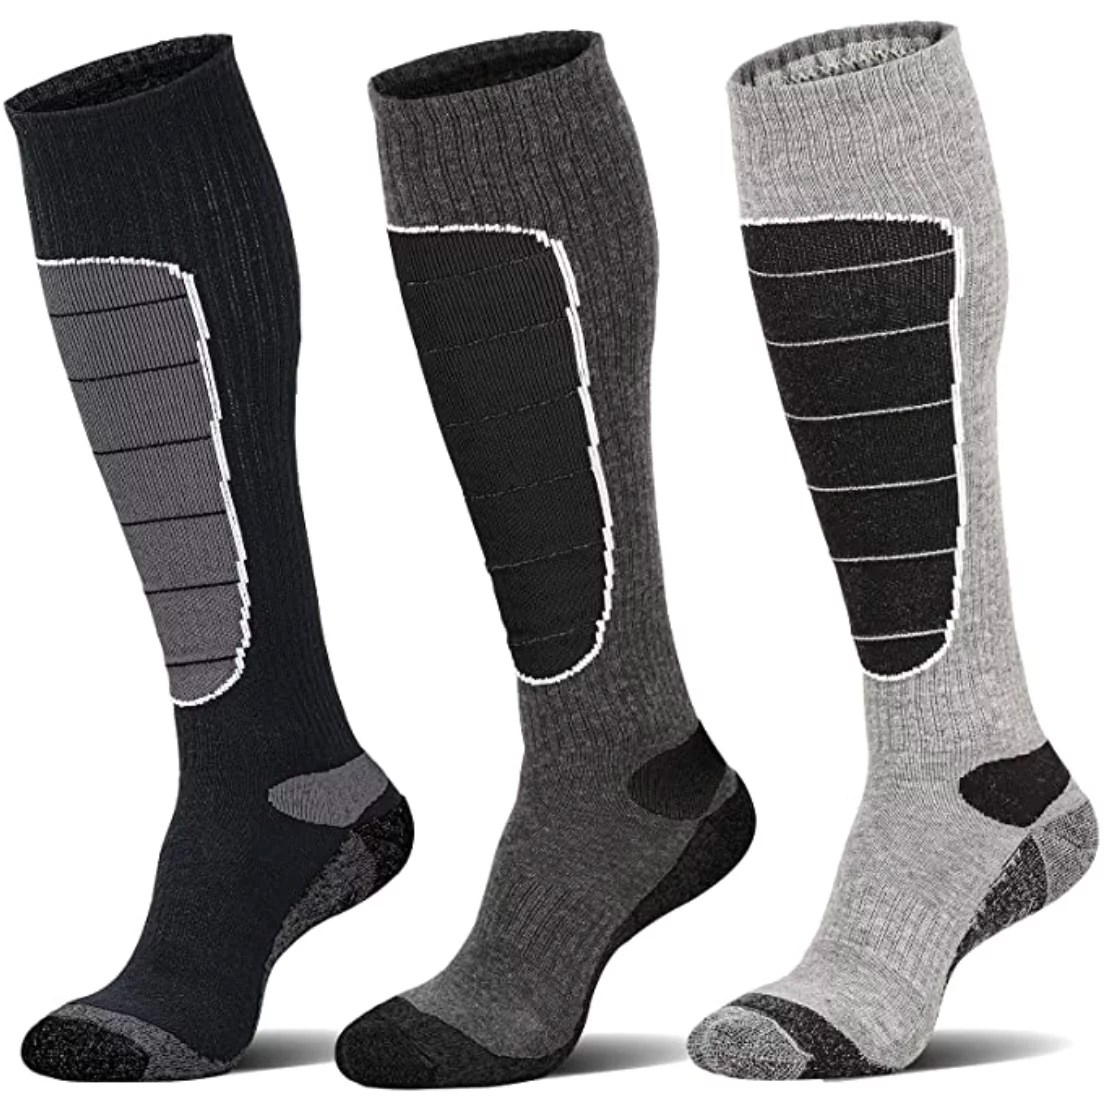 8 Best Heated Socks That Work in Extreme Weather 2023